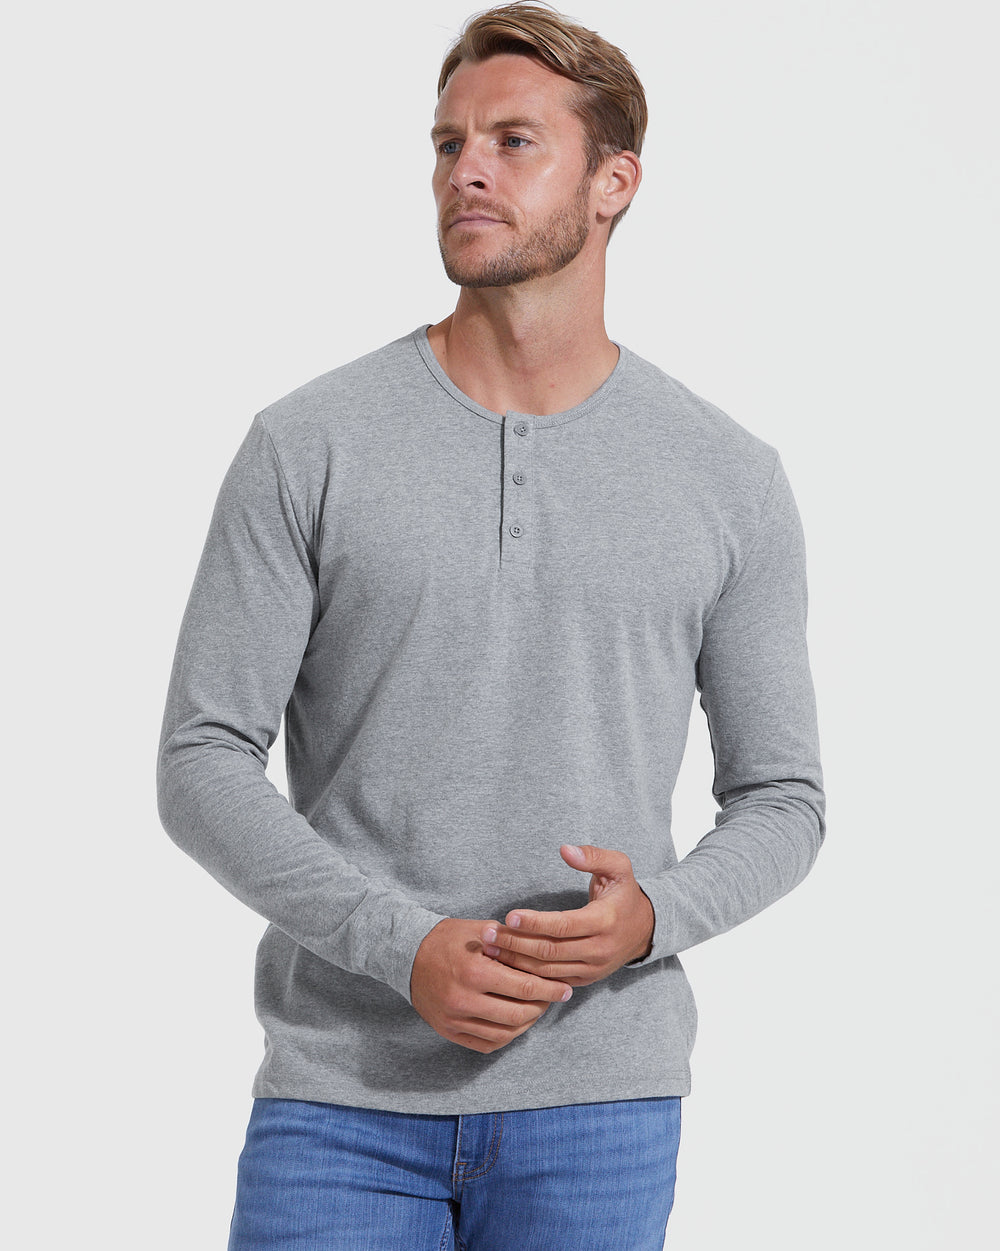 Snow Day Henley in Heathered Charcoal - FINAL SALE